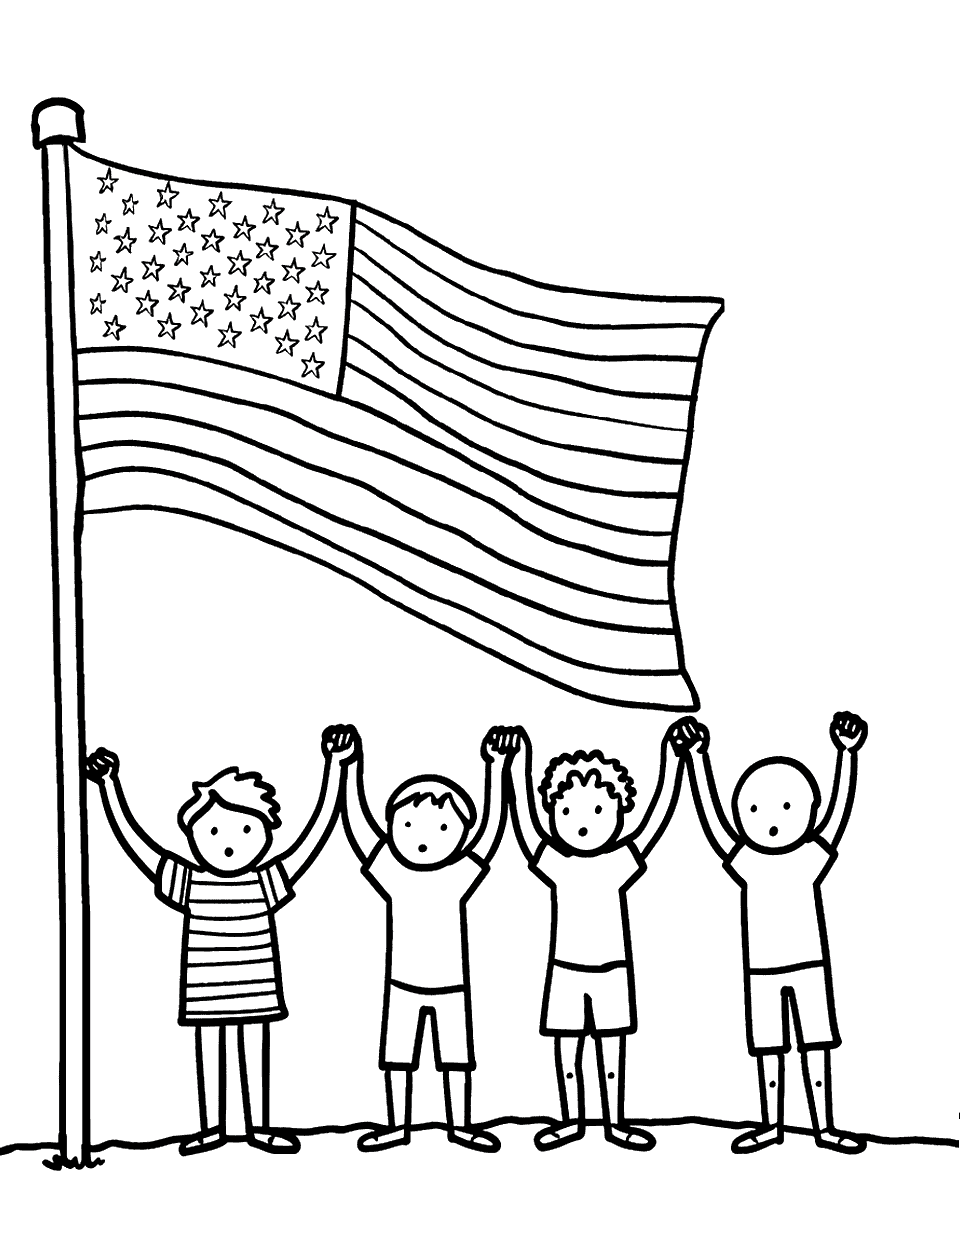 Kids Holding Hands Around the Flag American Coloring Page - Children holding hands near the American flag.